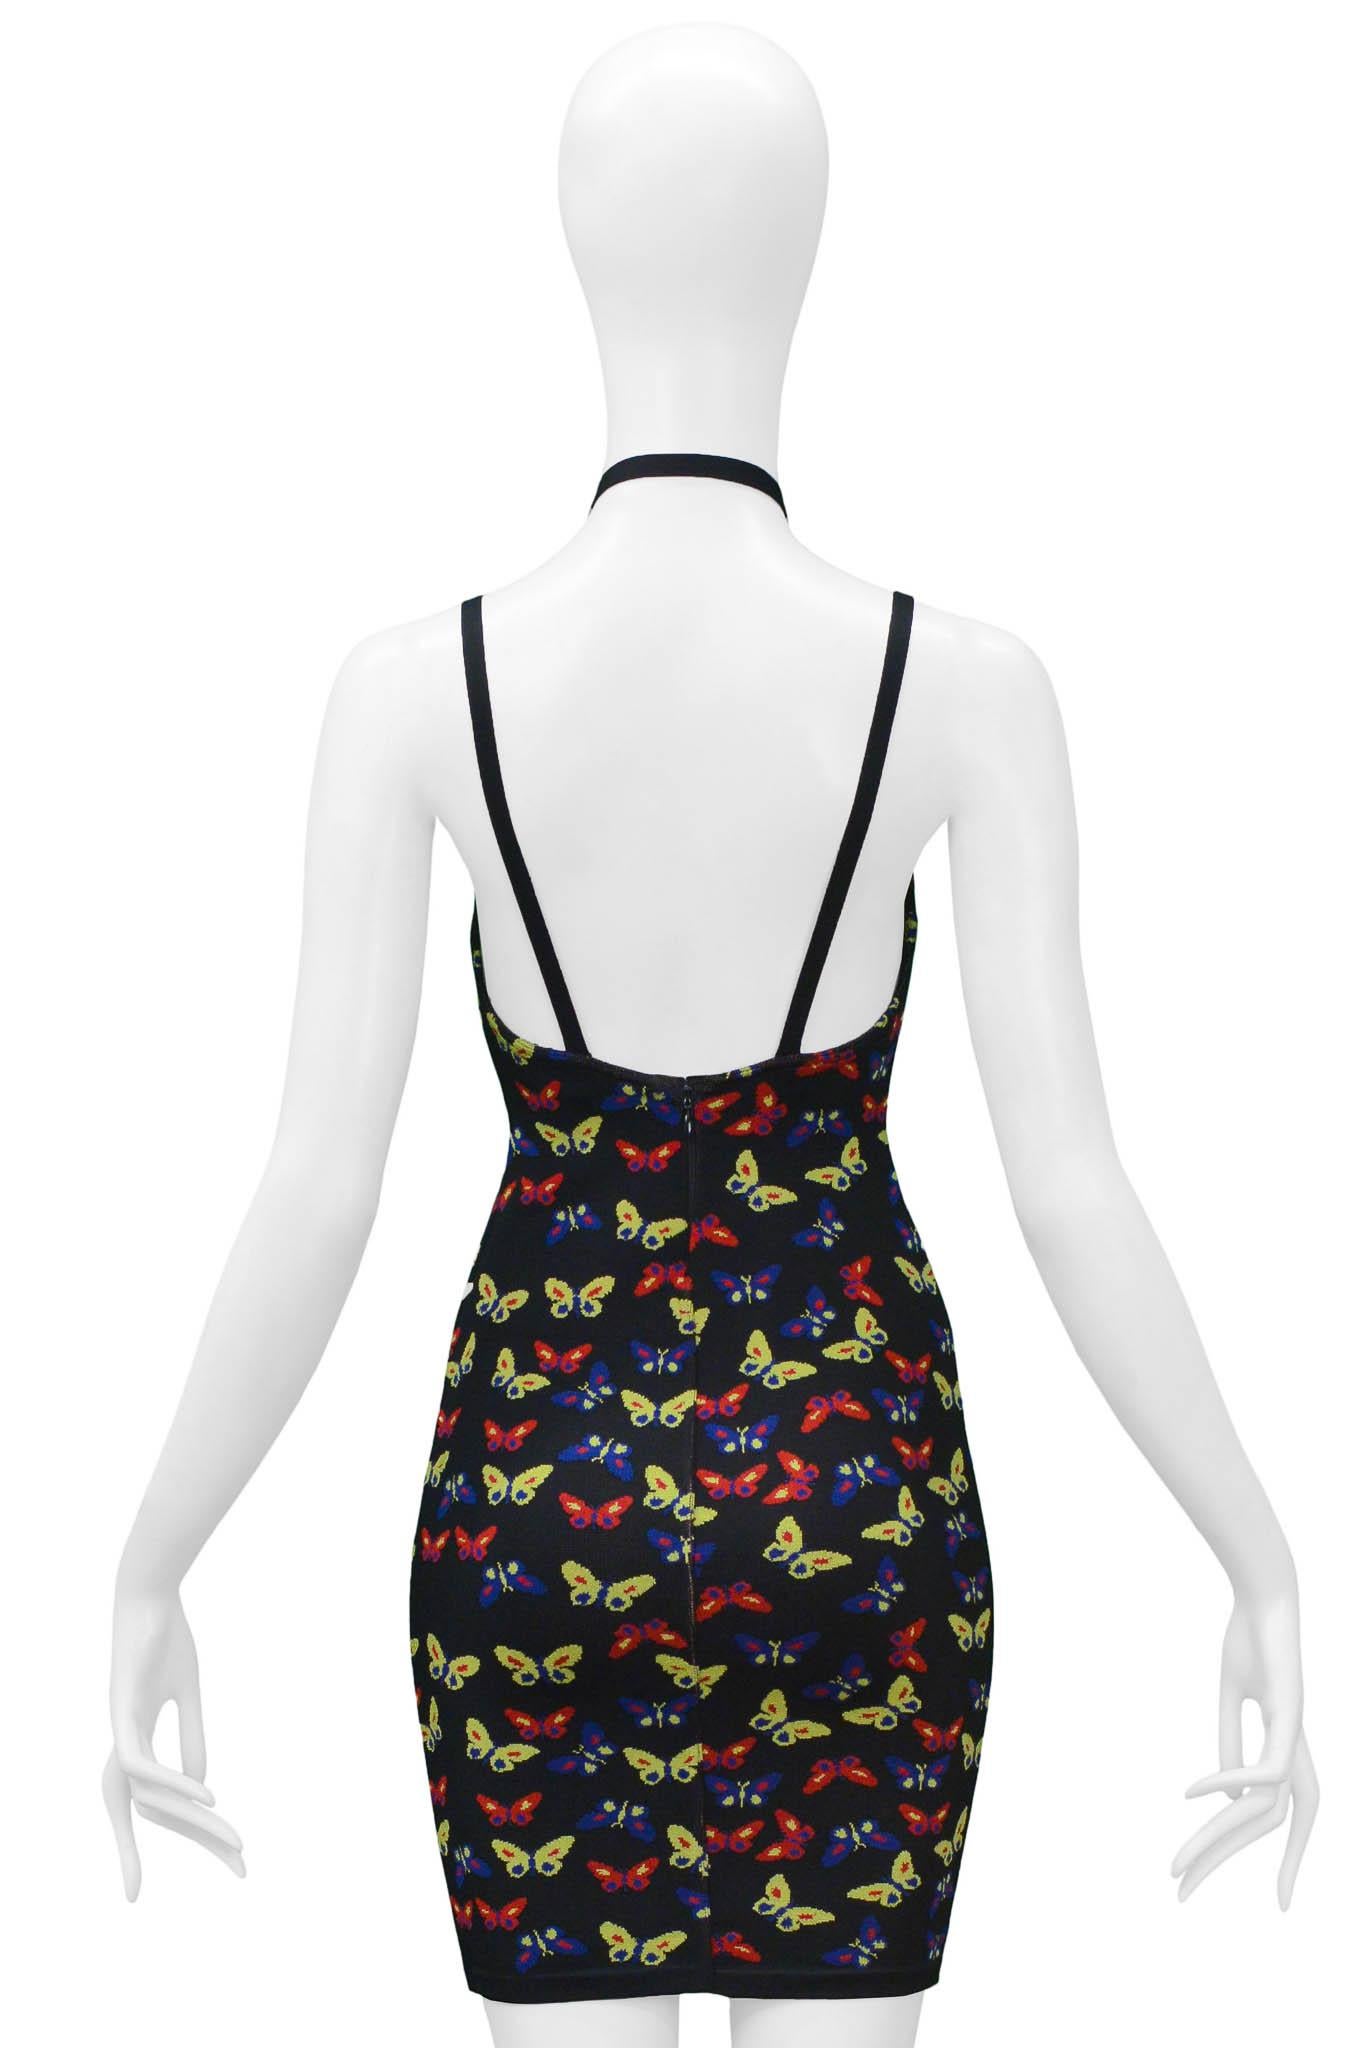 Women's Azzedine Alaia Iconic Butterly Print Knit Dress 1991 For Sale